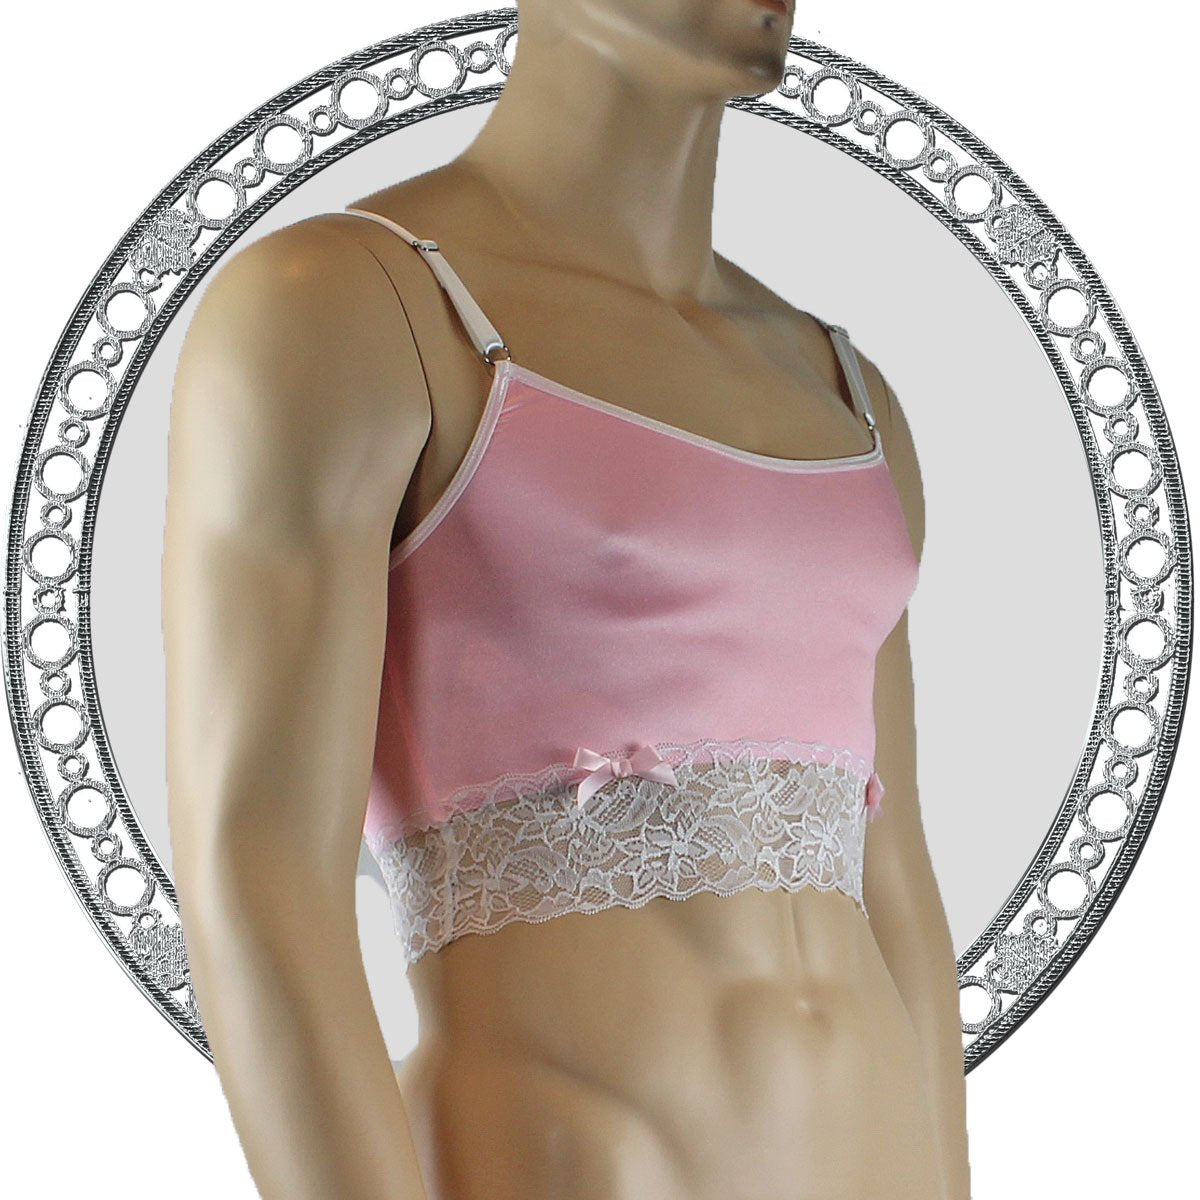 Mens Satin & Lace Crop Cami Top Pink and White